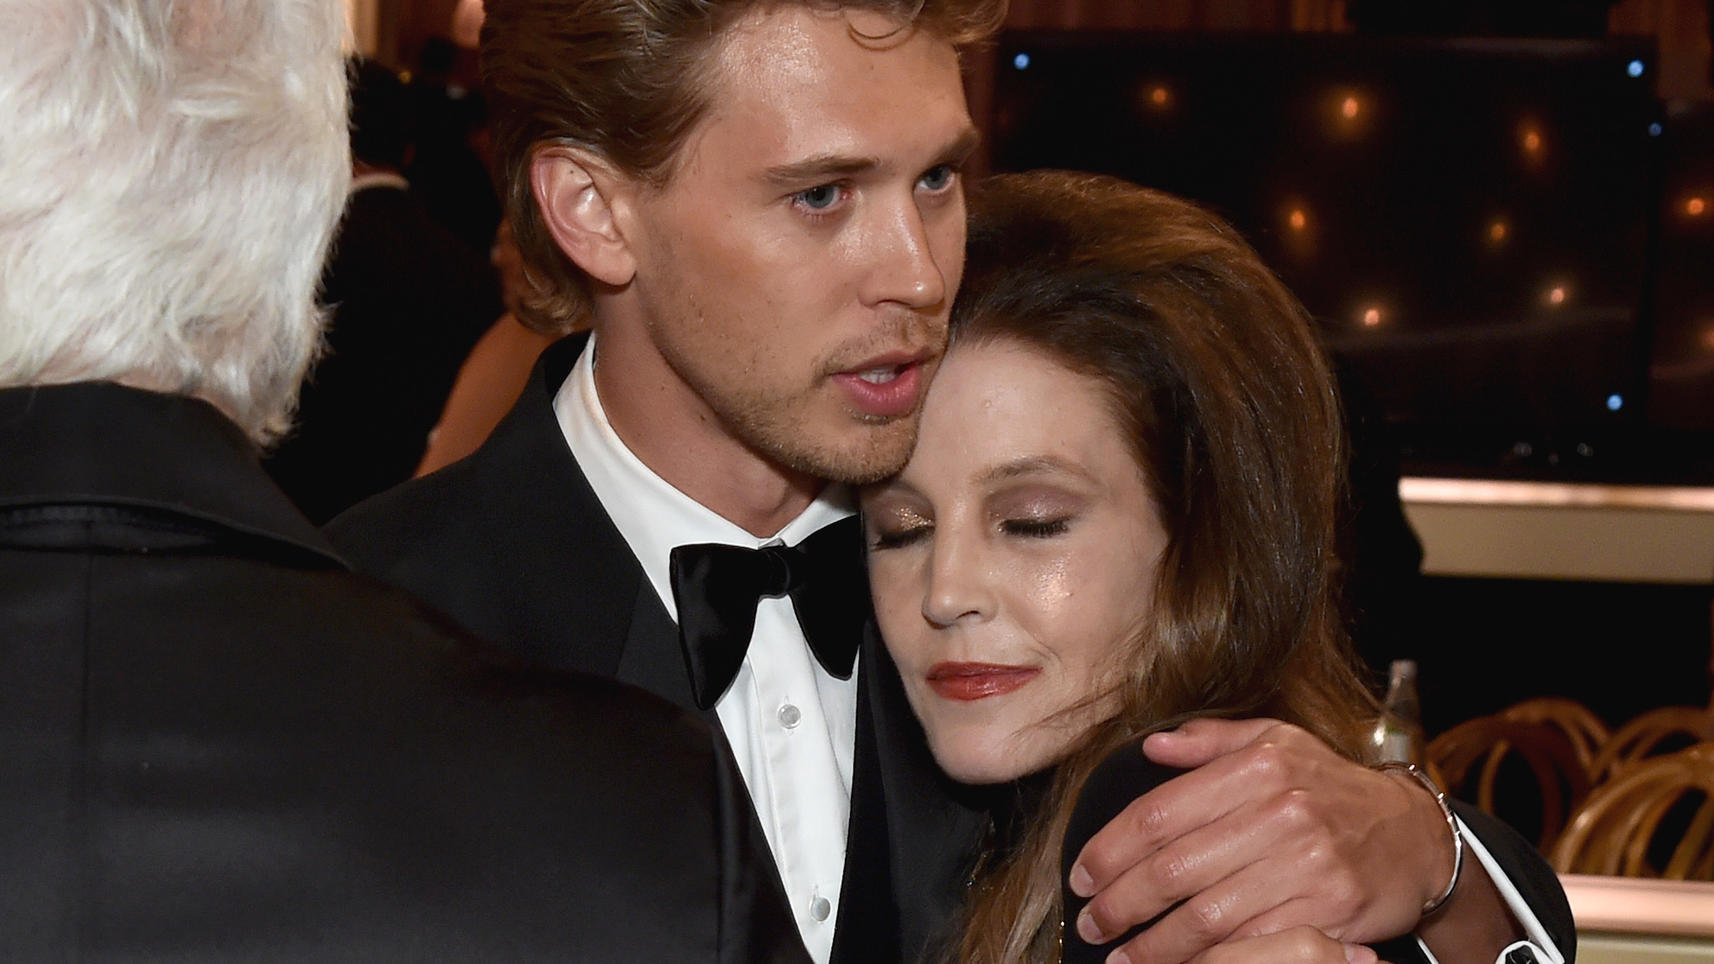 Austin Butler and Lisa Marie Presley during the 80th Annual Golden Globe Awards® show at the Beverly Hilton in Beverly Hills, CA on Tuesday, January 10, 2023*Editorial Use Only* CAP/PLF©HFPA/supplied by Capital Pictures